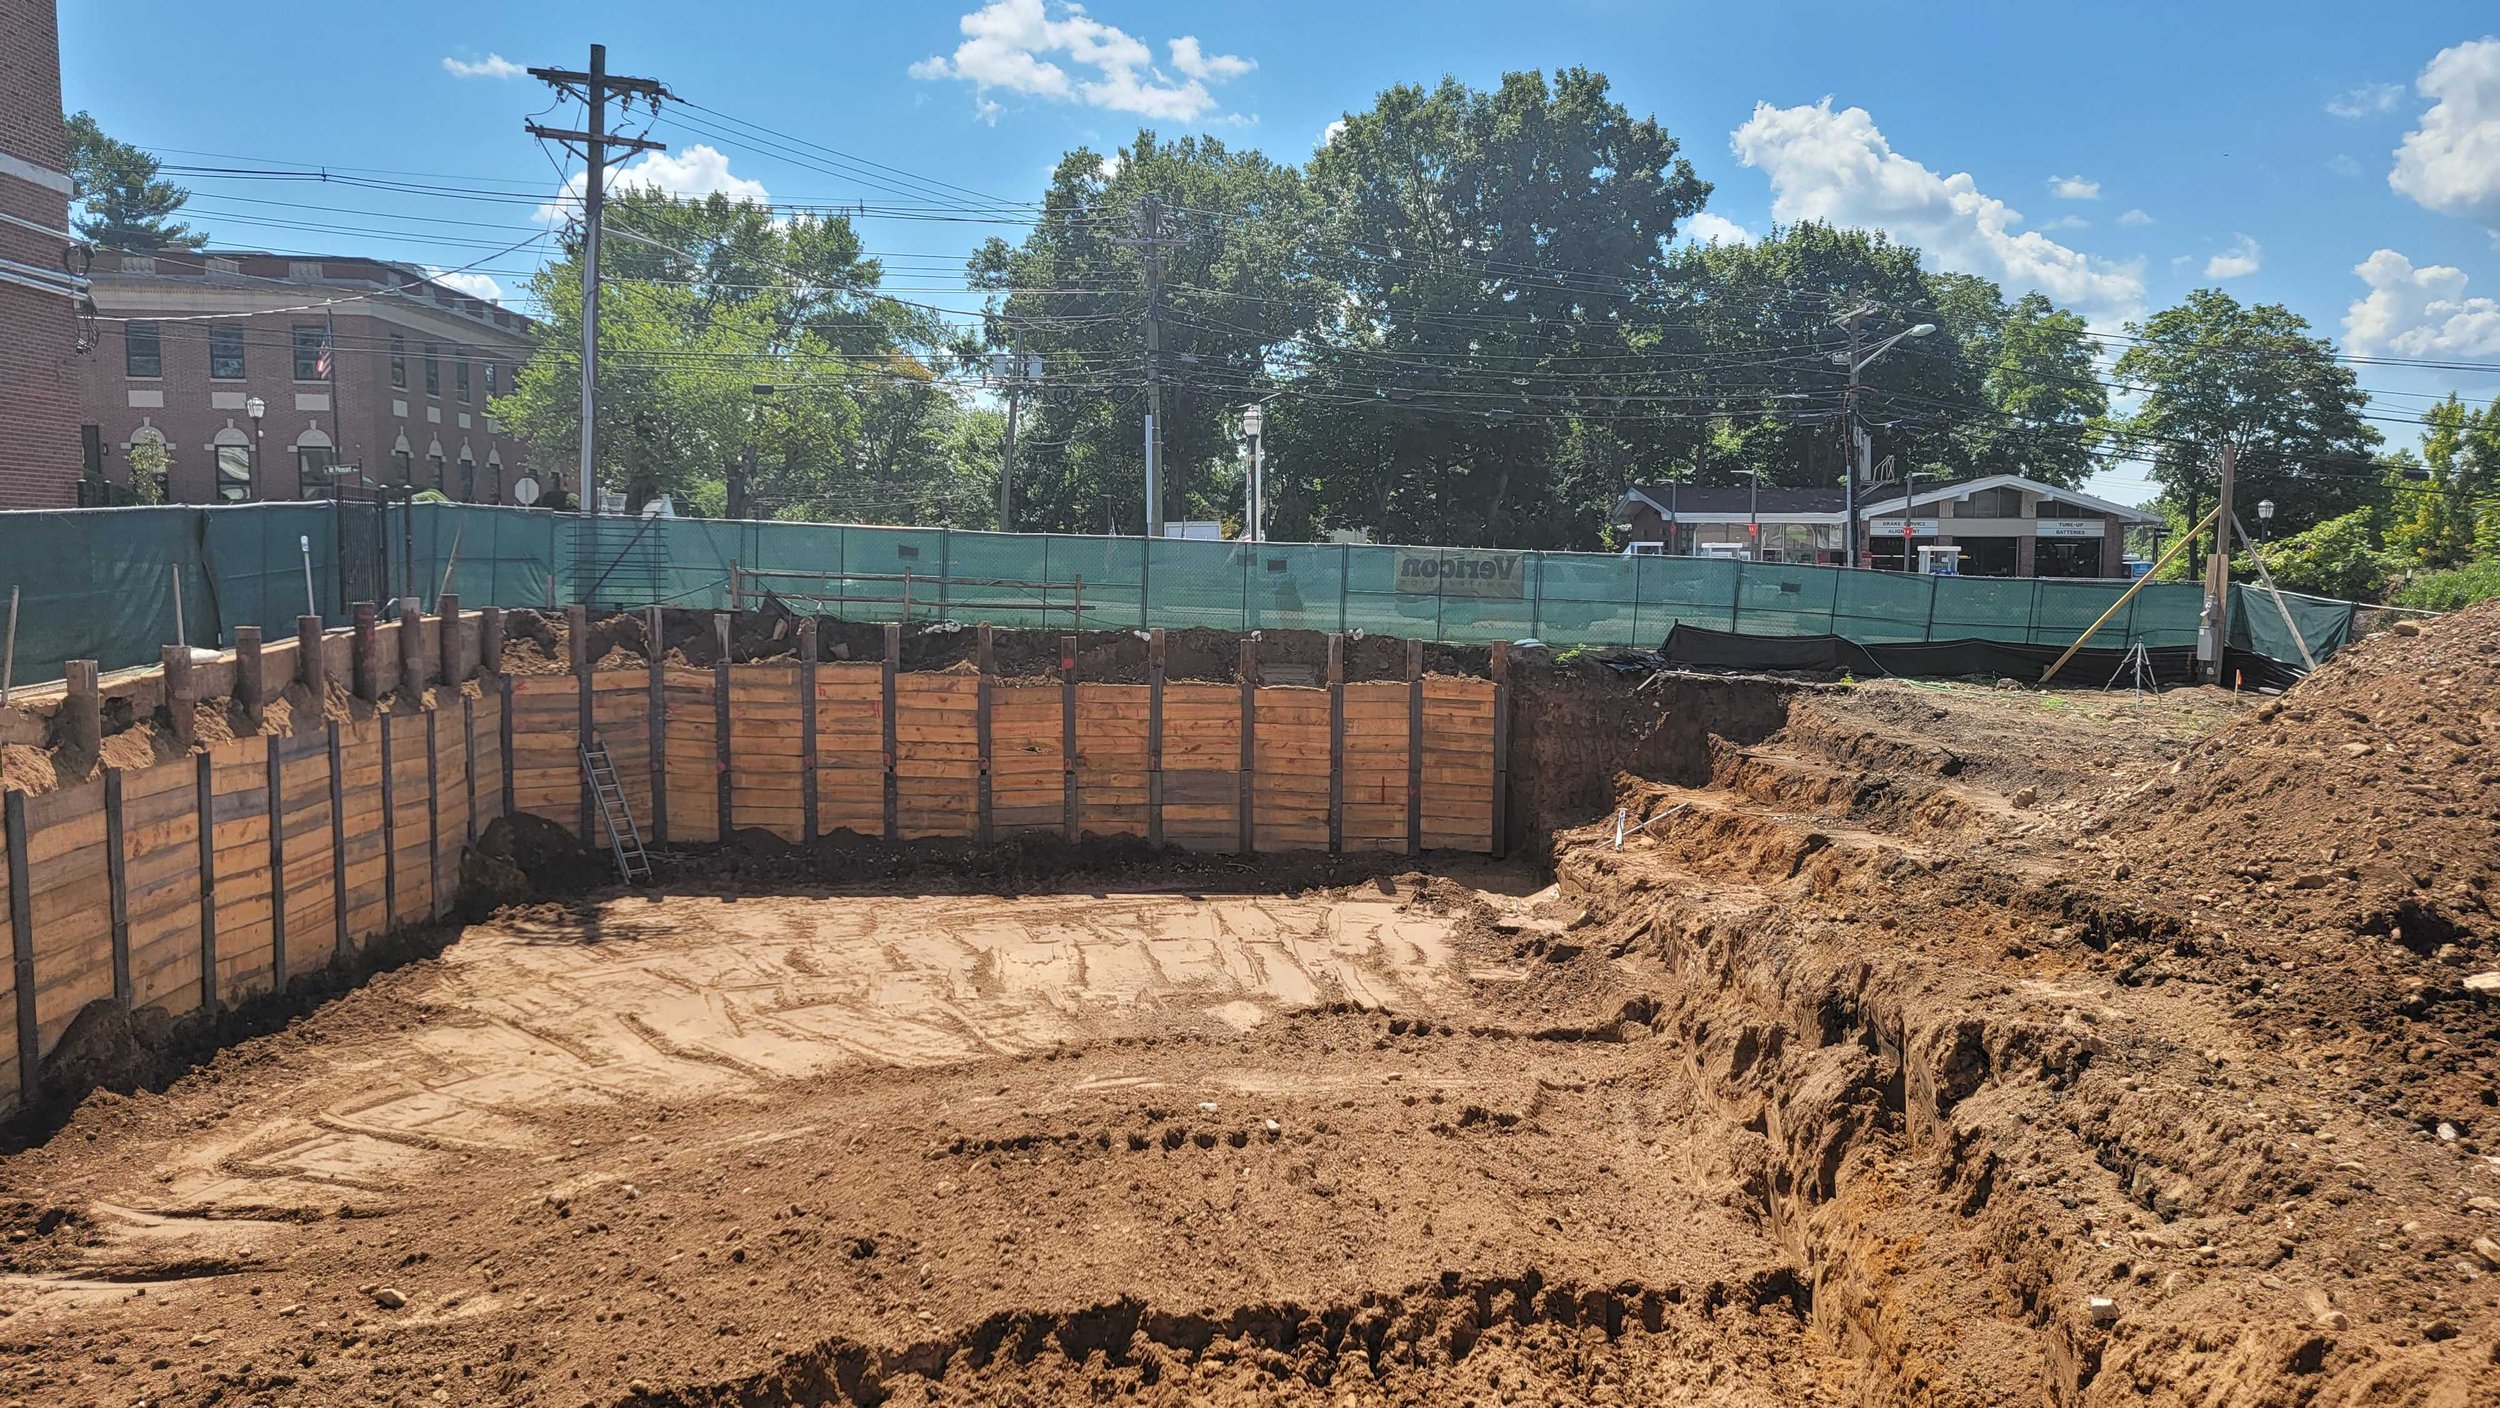 Support of Excavation - Northern NJ